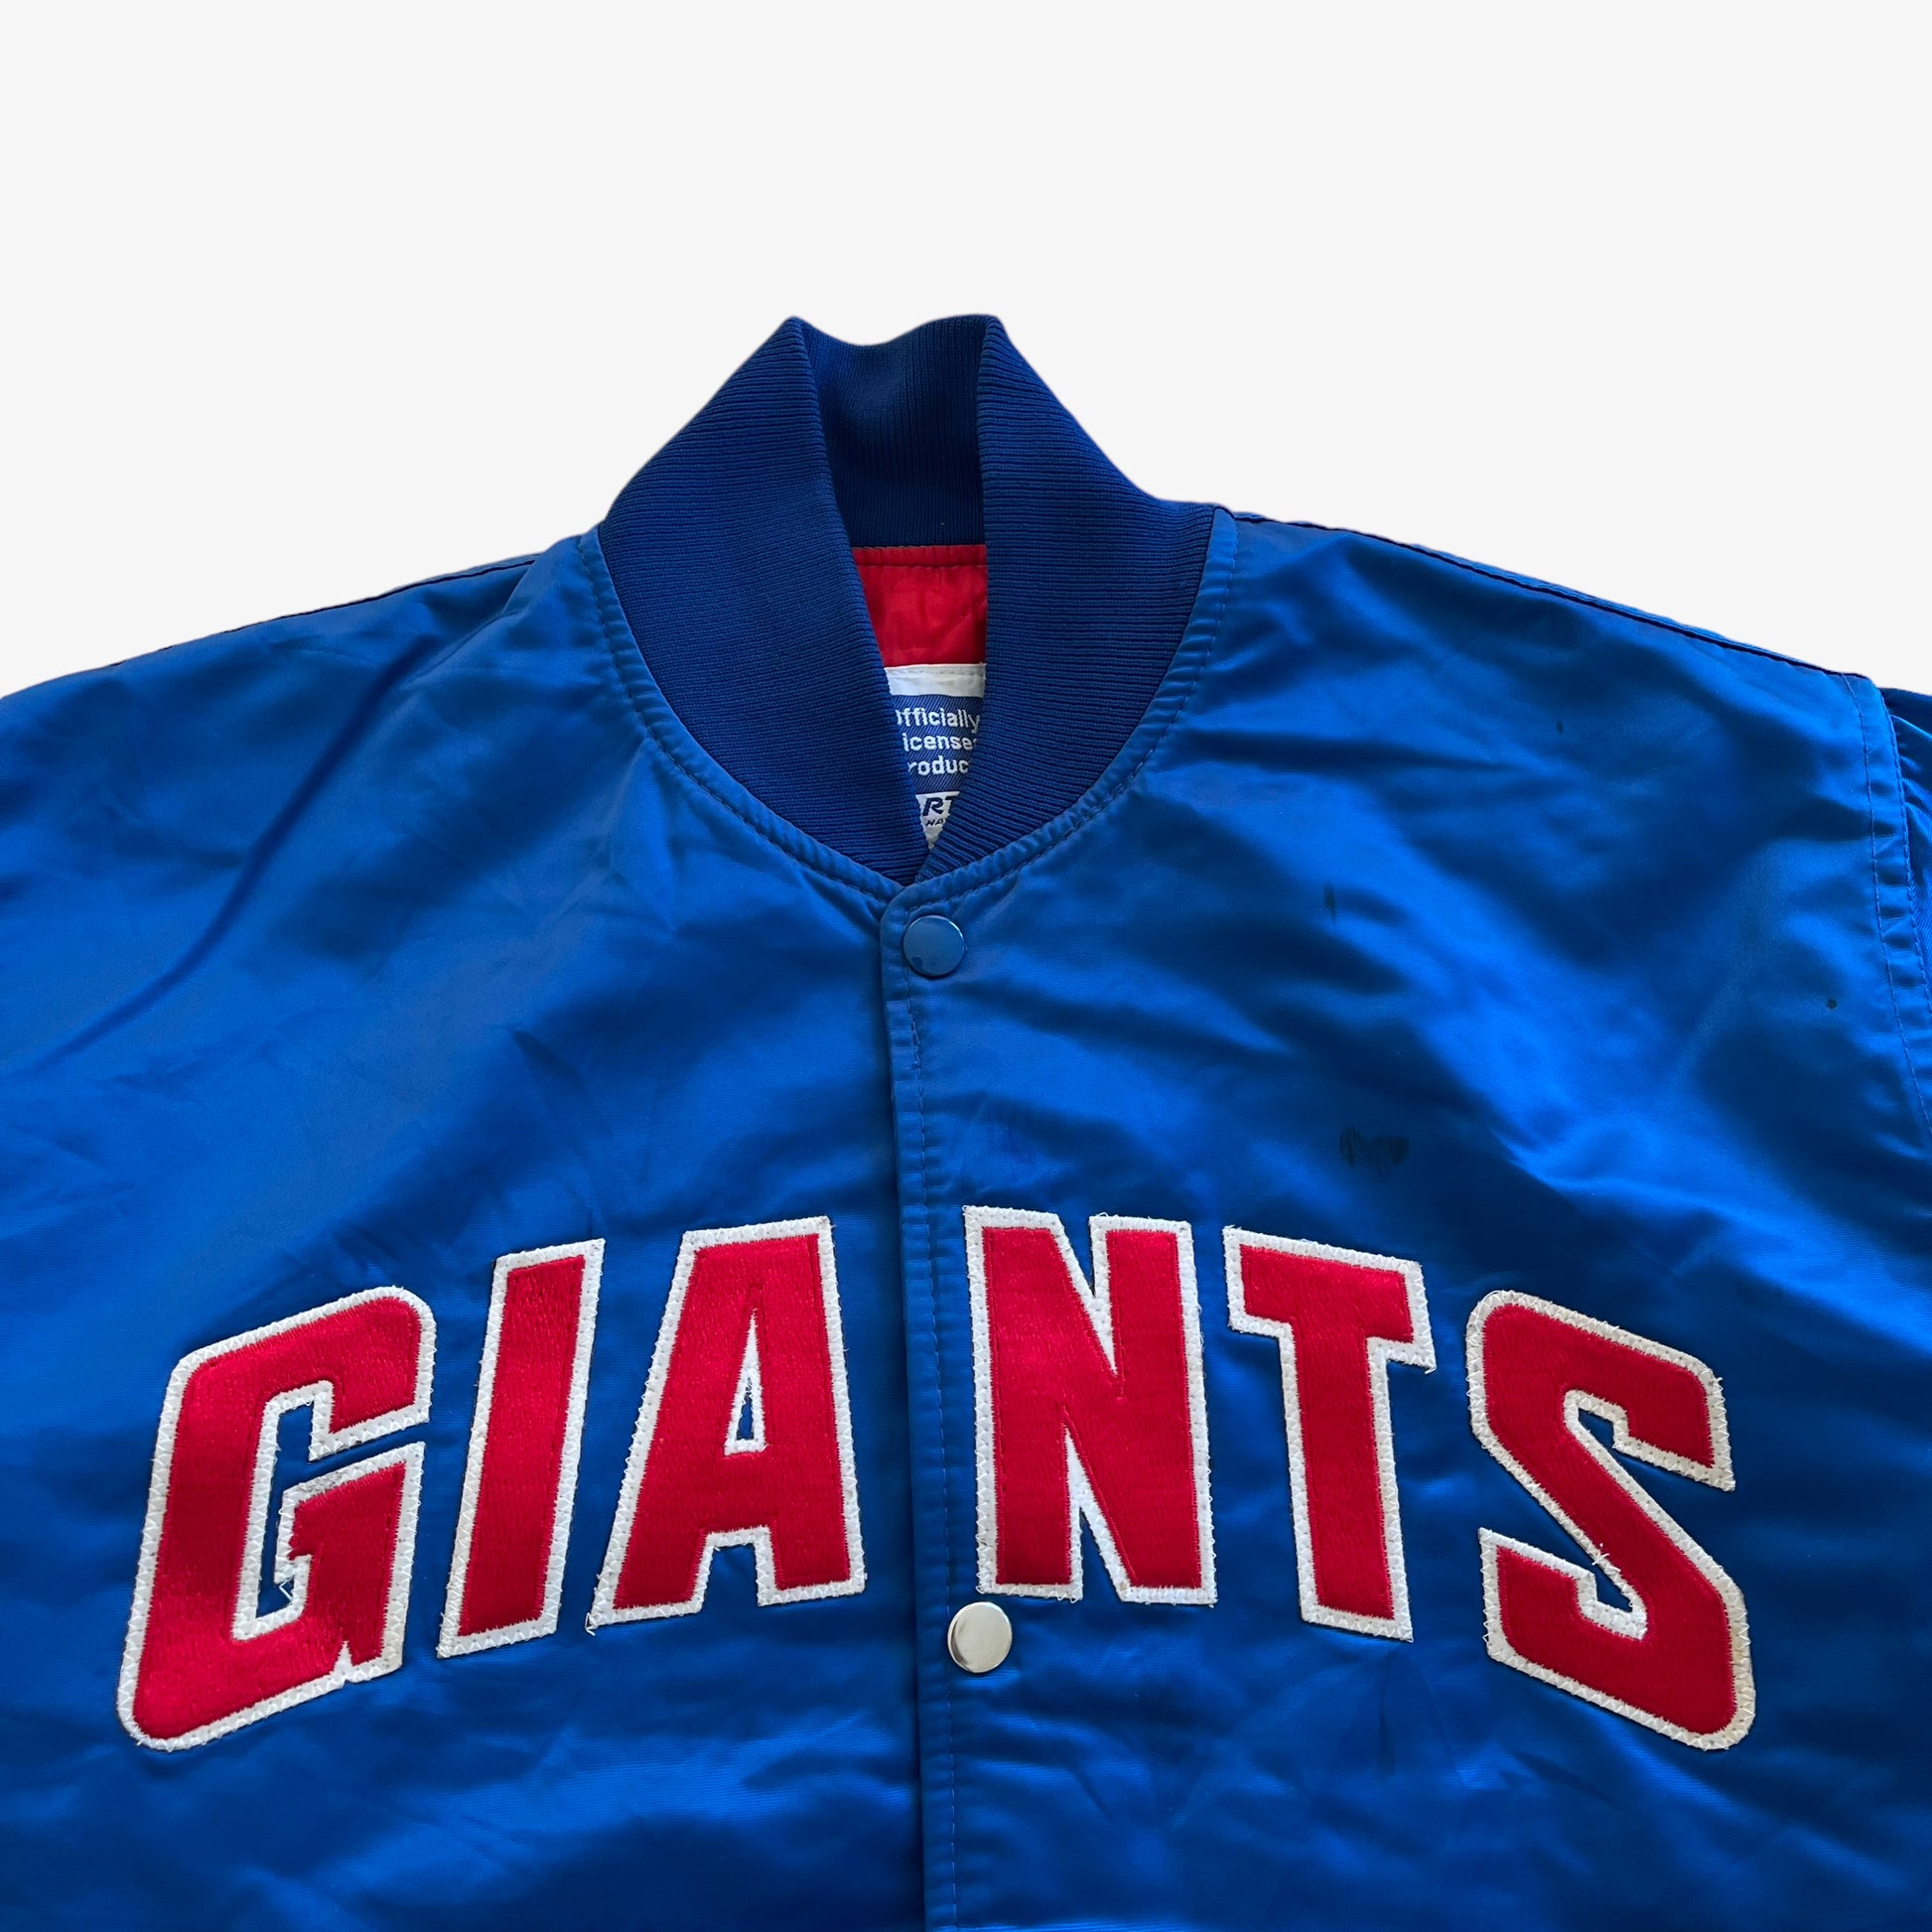 Vintage 90s Starter NFL New York Giants Jacket With Back Embroidered Team Badge Button - Casspios Dream